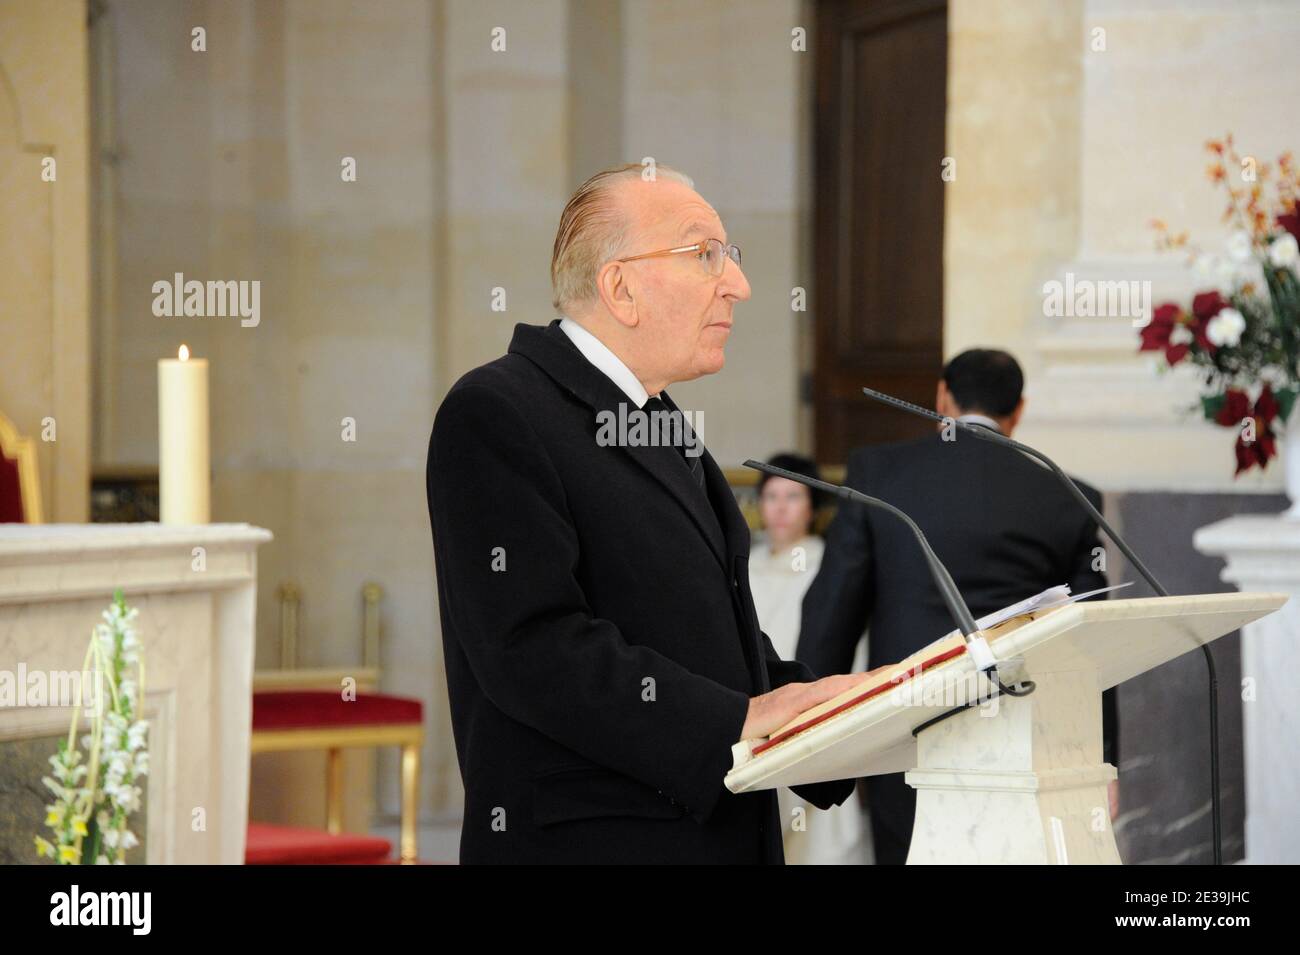 Yvon Gattaz, former President of Medef attending the Tribute to 1988 Nobel economics winner Maurice Allais at the Saint-Louis des Invalides church in Paris, France on October 16, 2010. Photo by Henri Szwarc/ABACAPRESS.COM Stock Photo